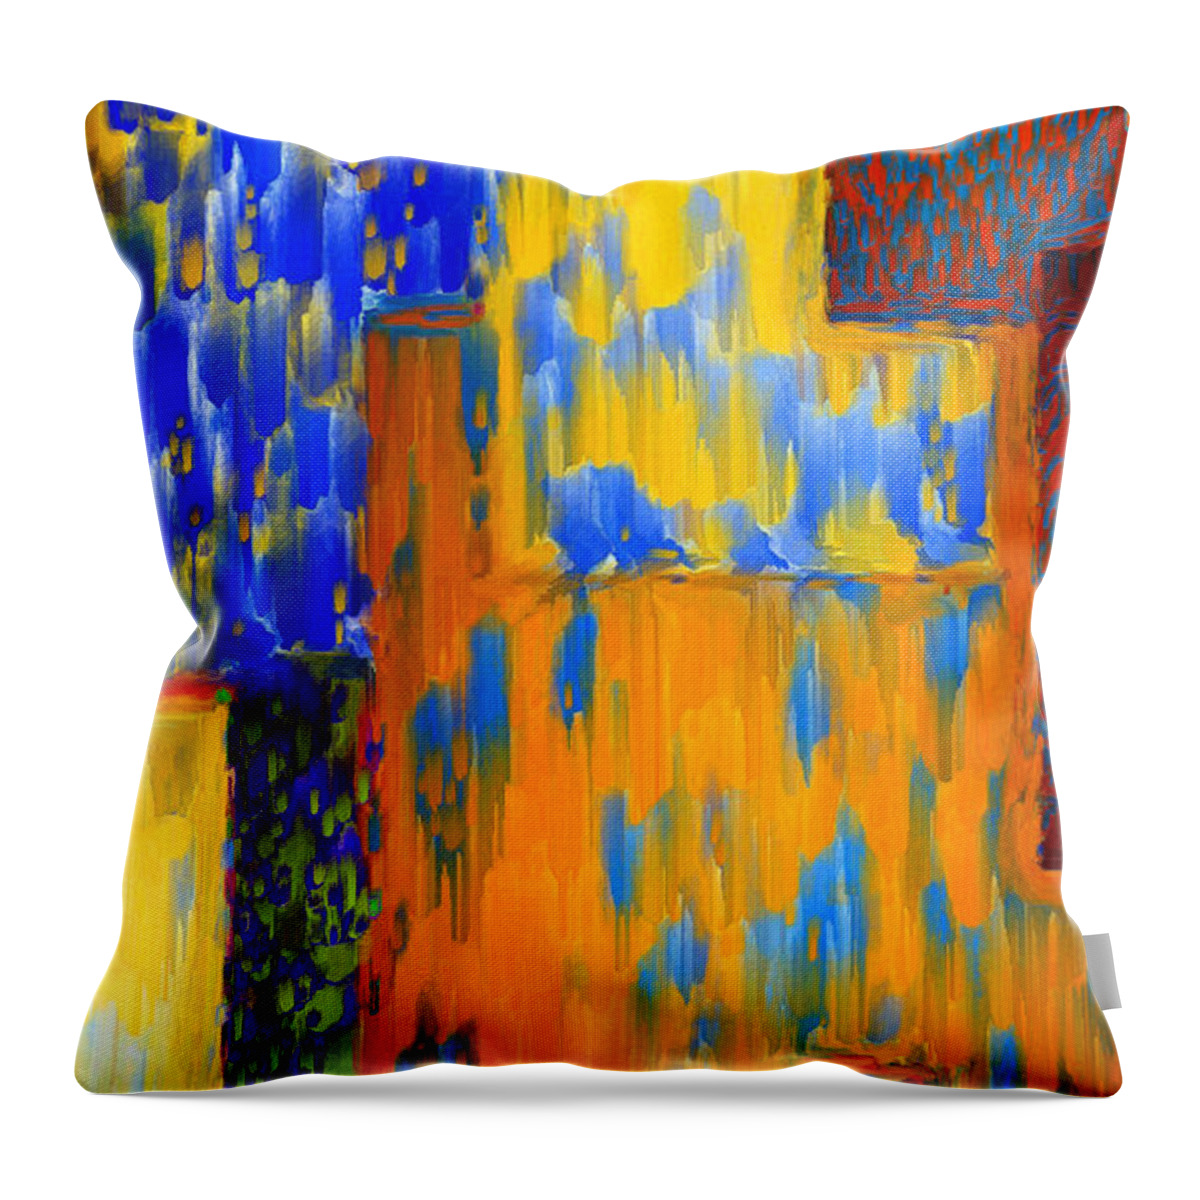 Abstract Throw Pillow featuring the painting Abstract in Blue Orange Red Yellow by Rafael Salazar